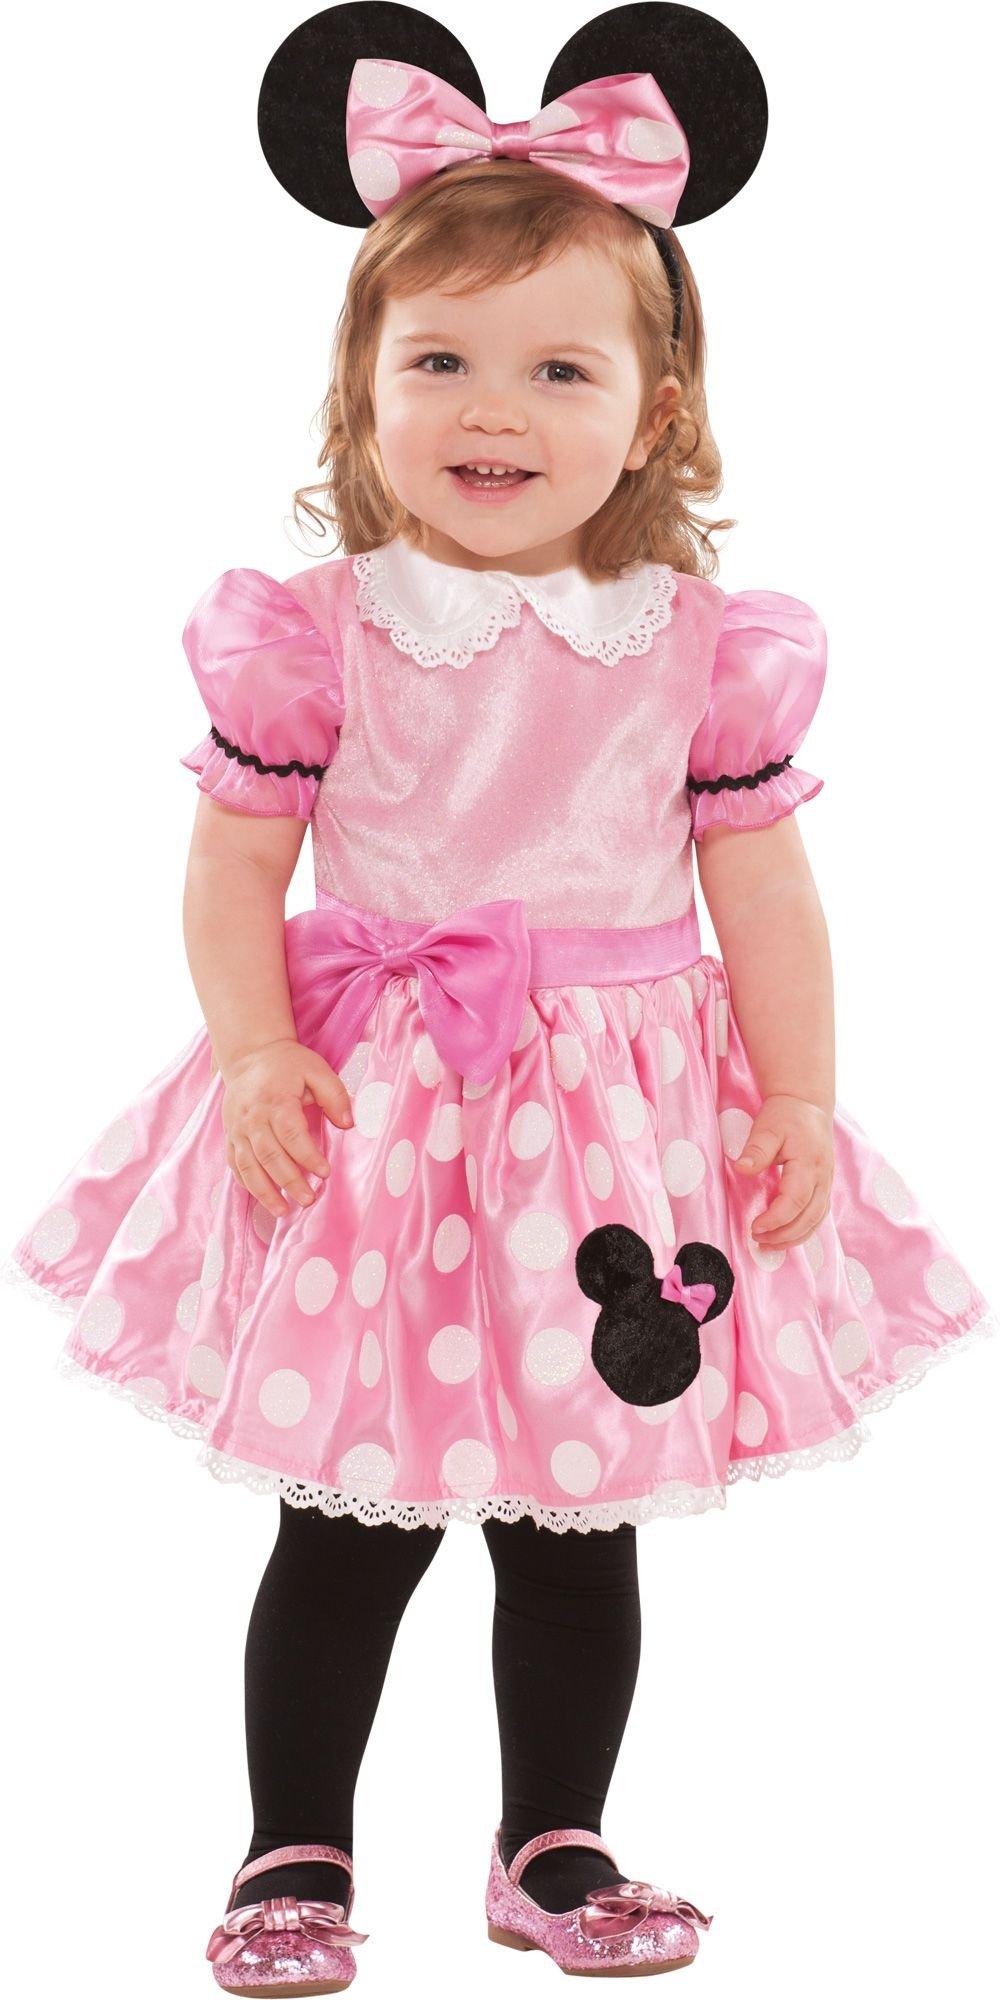 Minnie Mouse Costumes for Kids & Adults | Party City